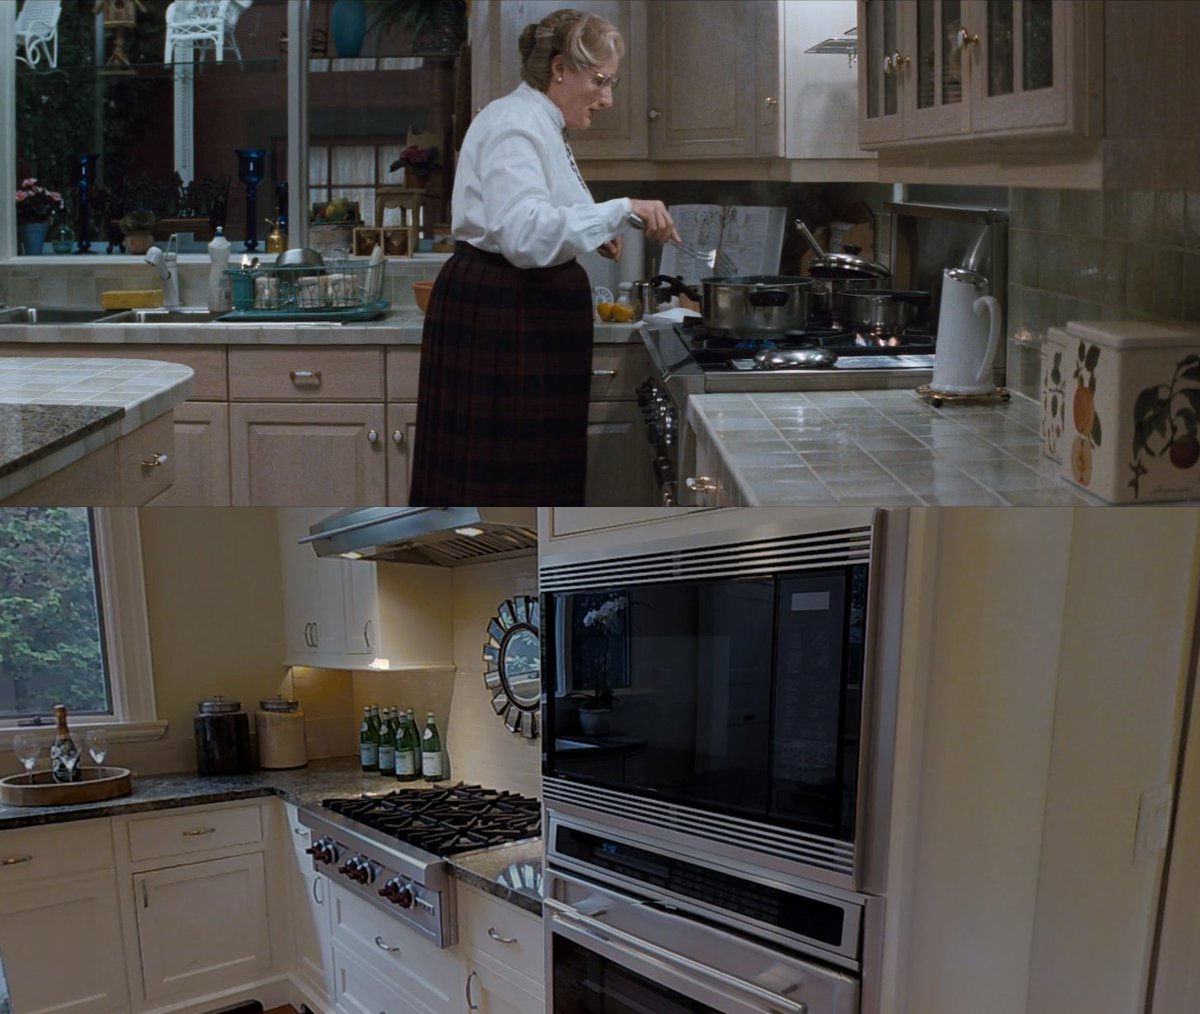 I used to think this shot was impossible since the ovens are right there, but perhaps the camera is slammed right up against them? Looks totally impossible with the modern version below.